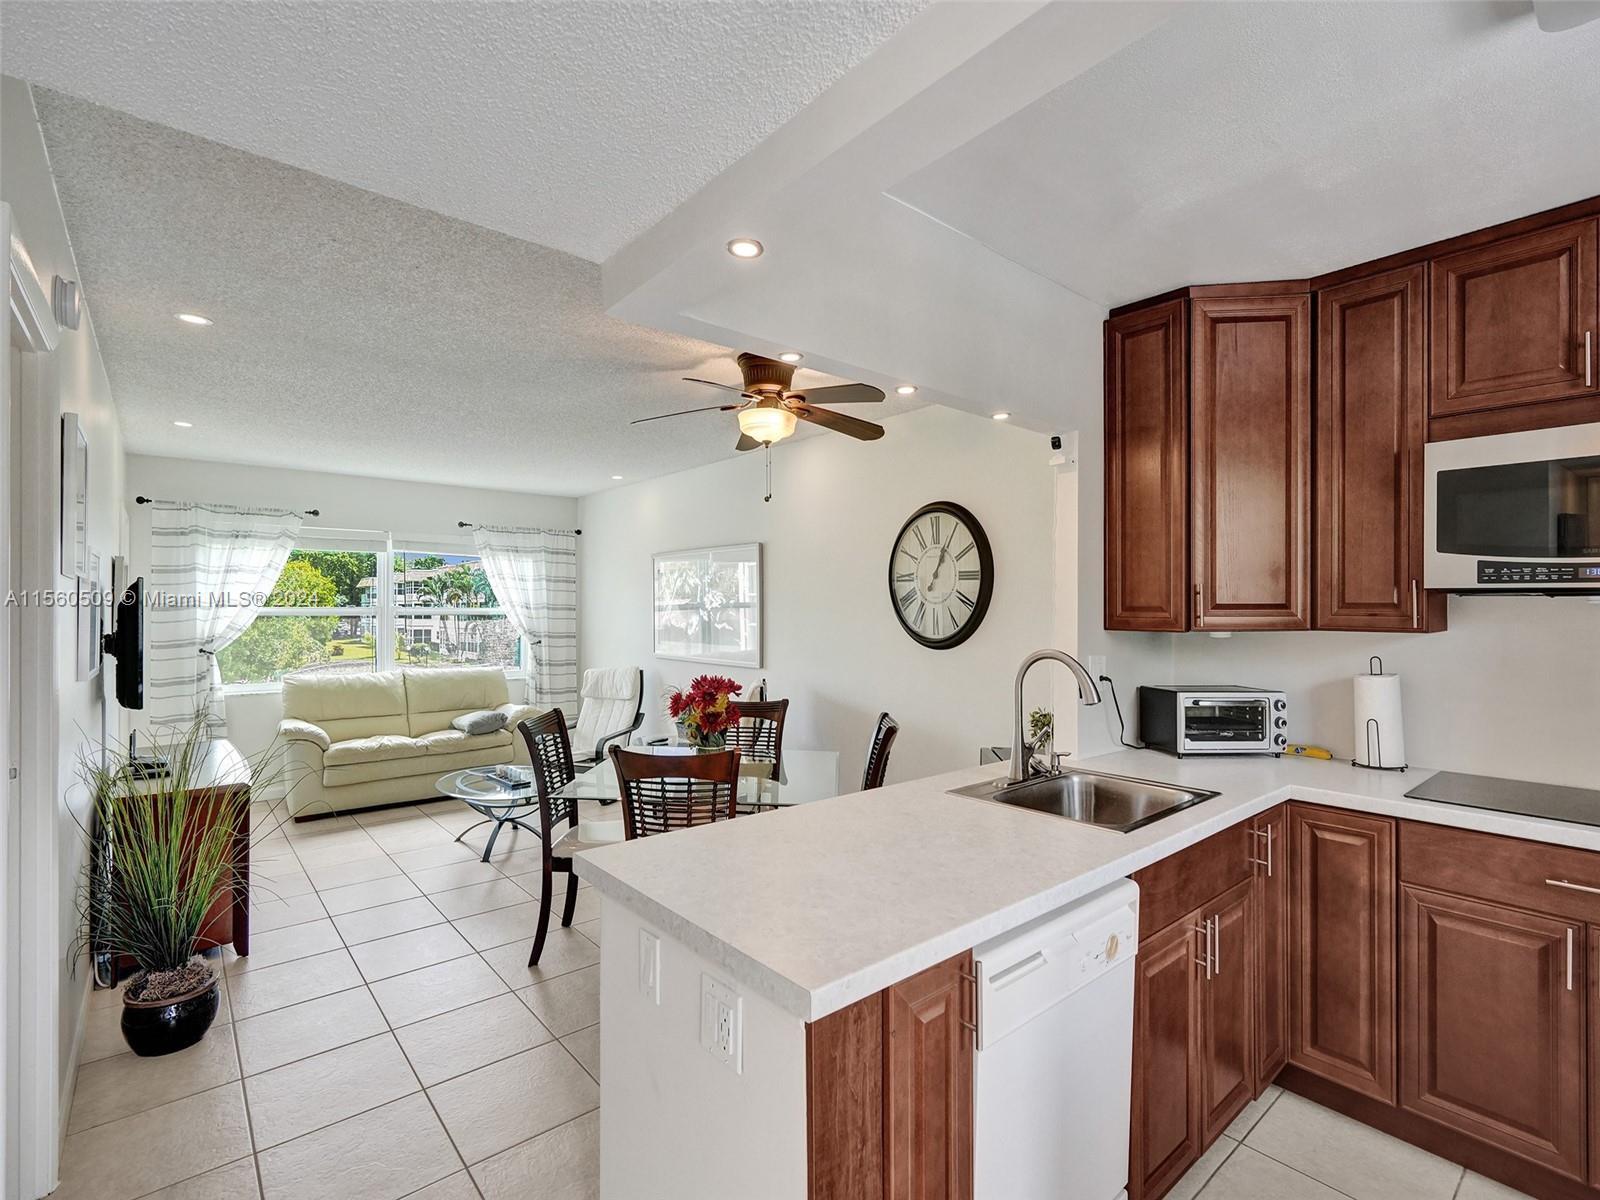 Photo of 3506 NW 49th Ave #511 in Lauderdale Lakes, FL